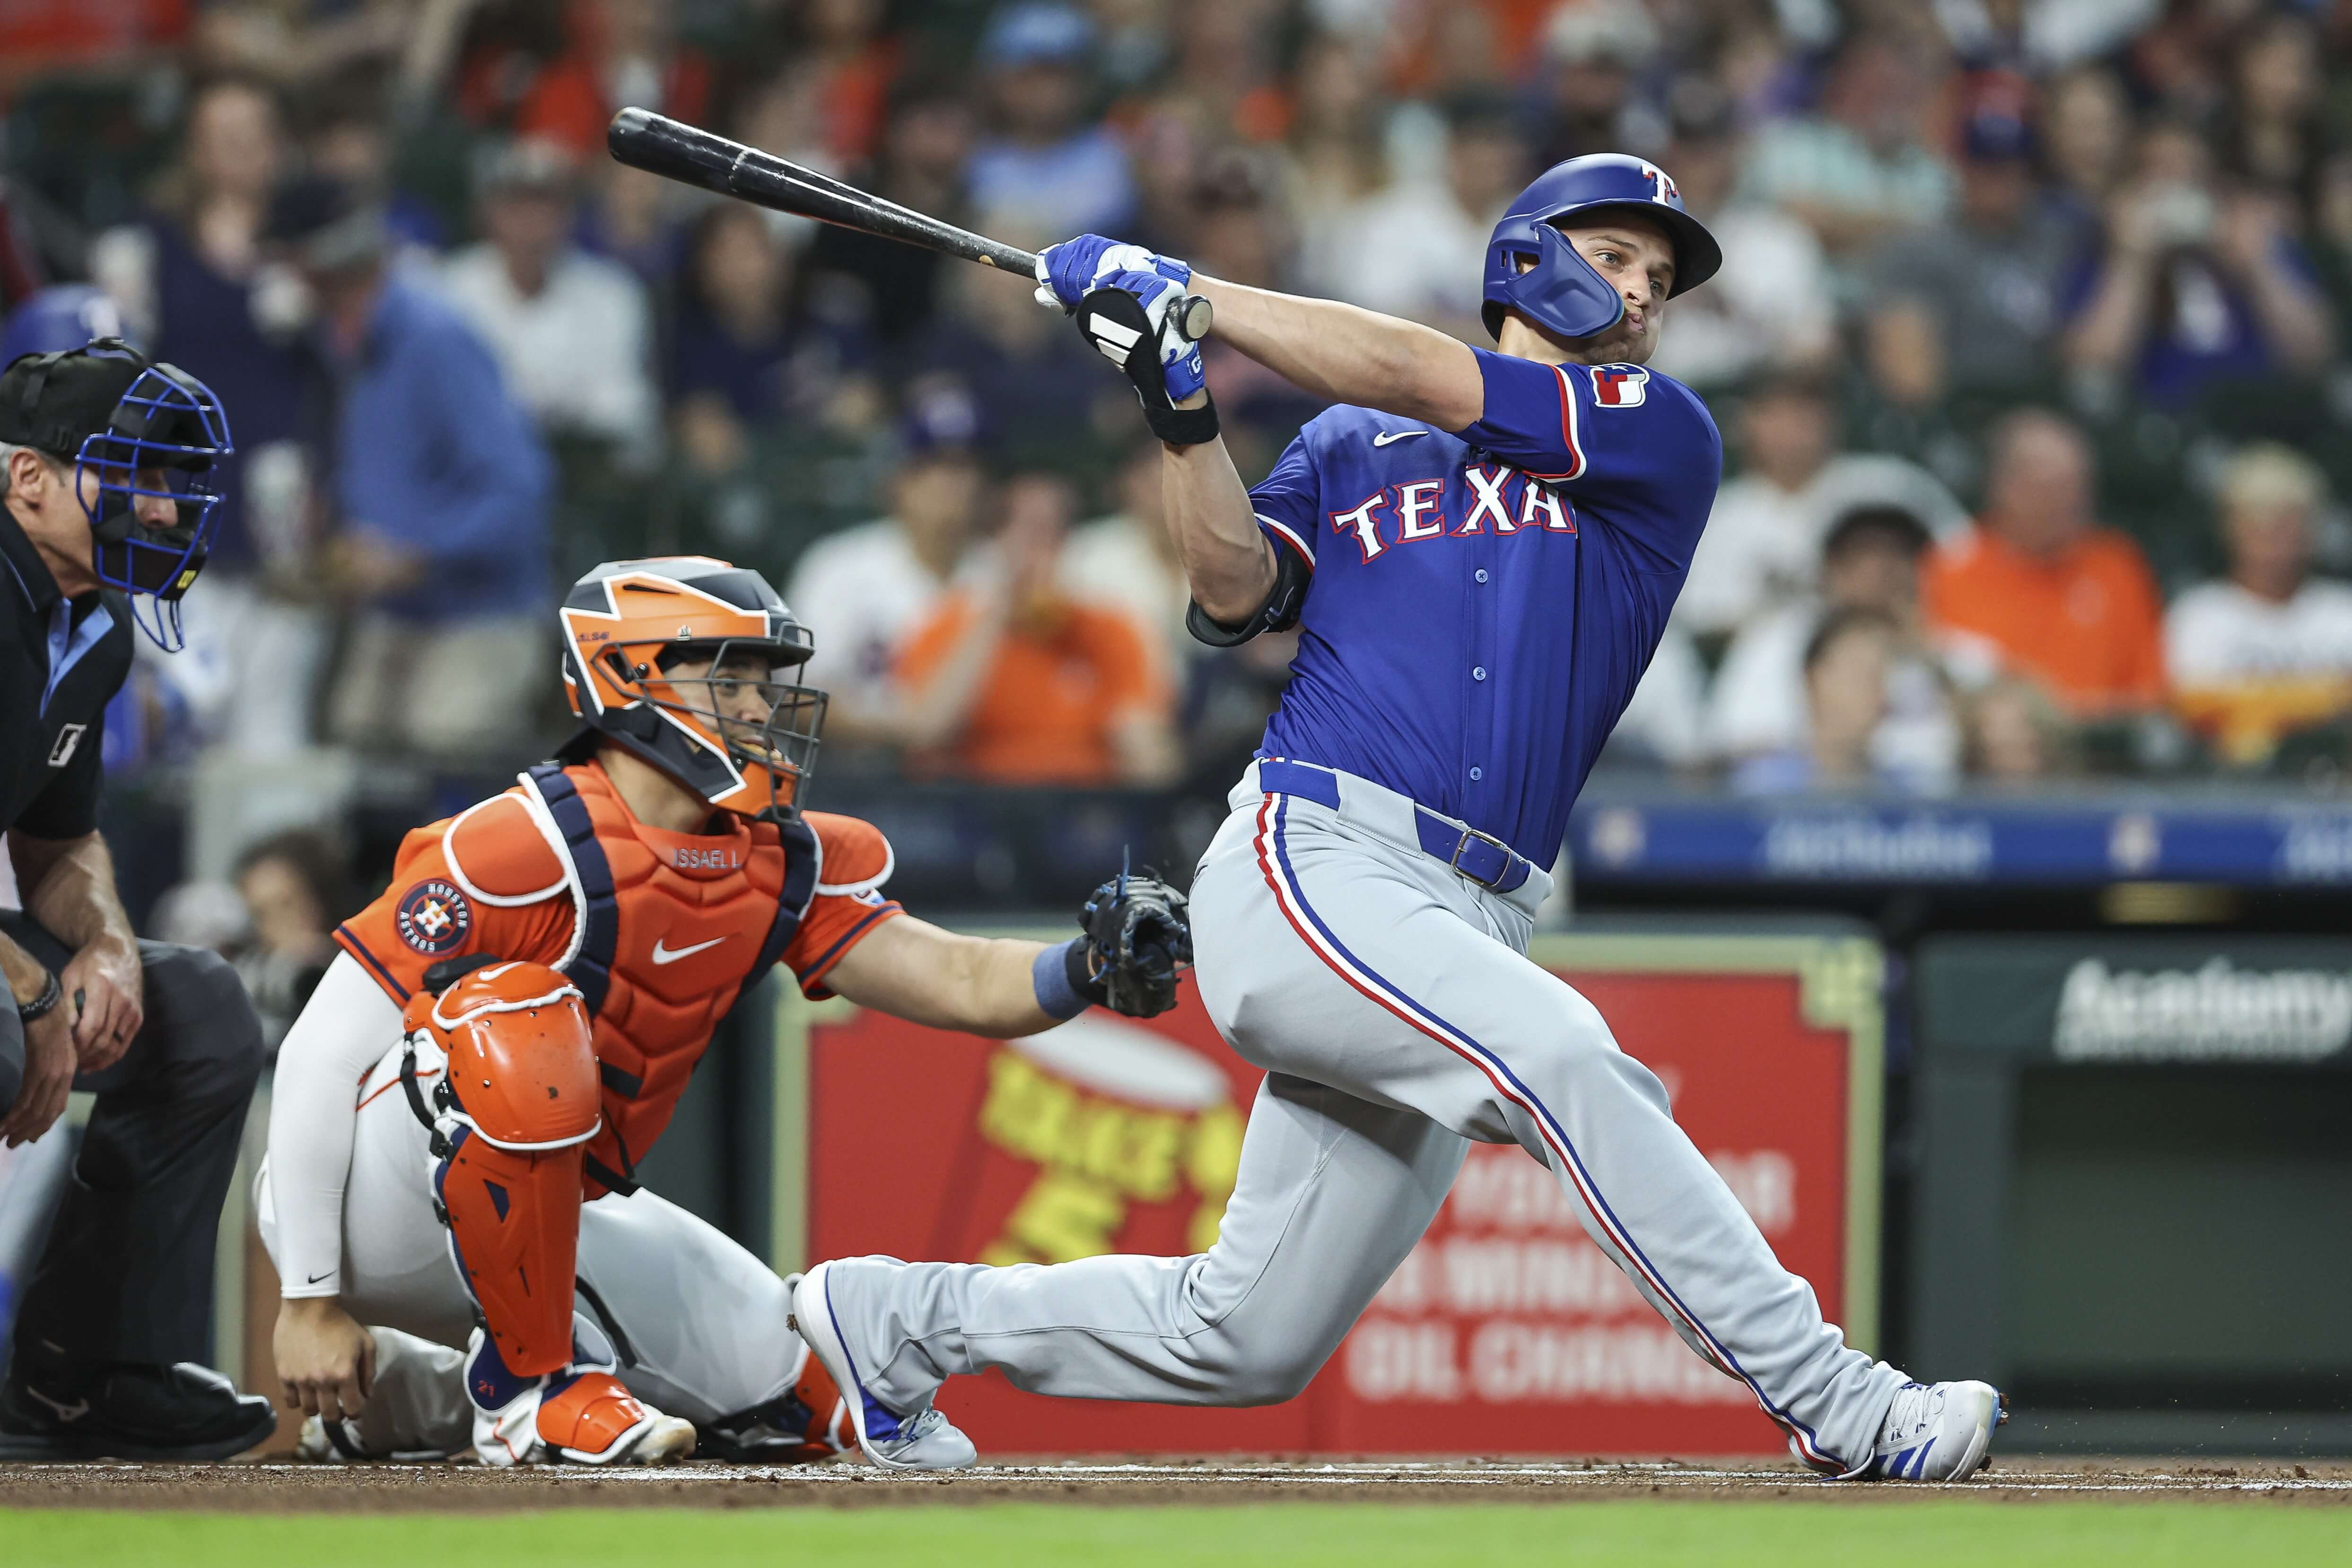 How To Bet - Rangers vs Tigers Prediction, Picks, and Odds for Today's MLB Game